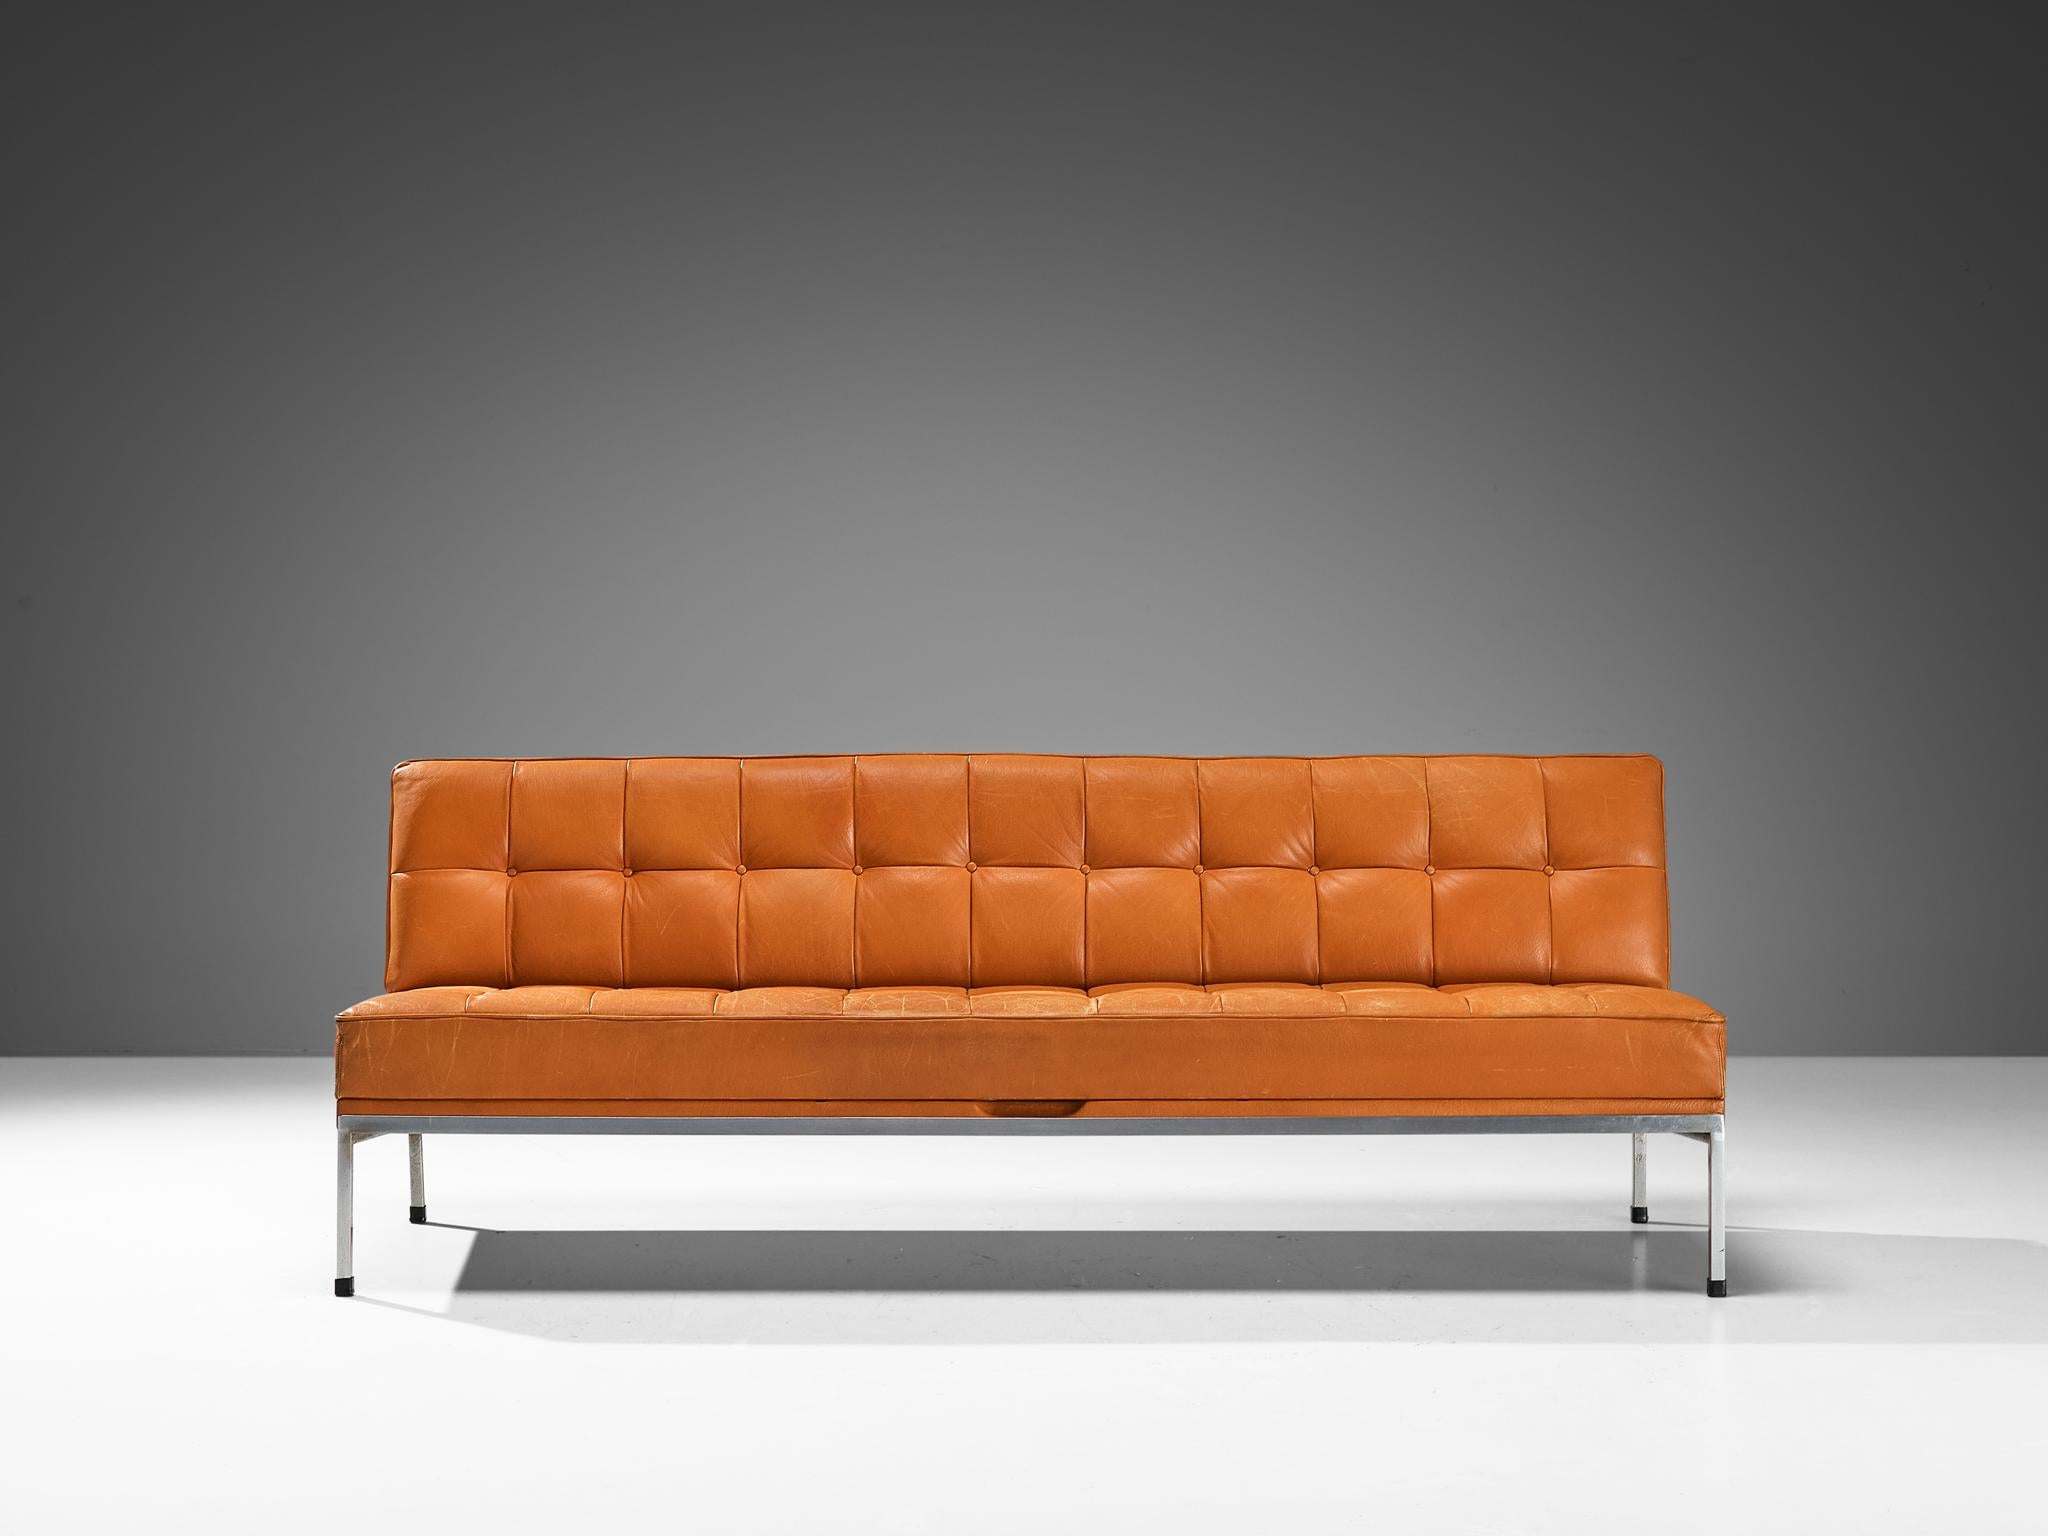 Johannes Spalt 'Constanza' Sofa Daybed in Cognac Leather  For Sale 2